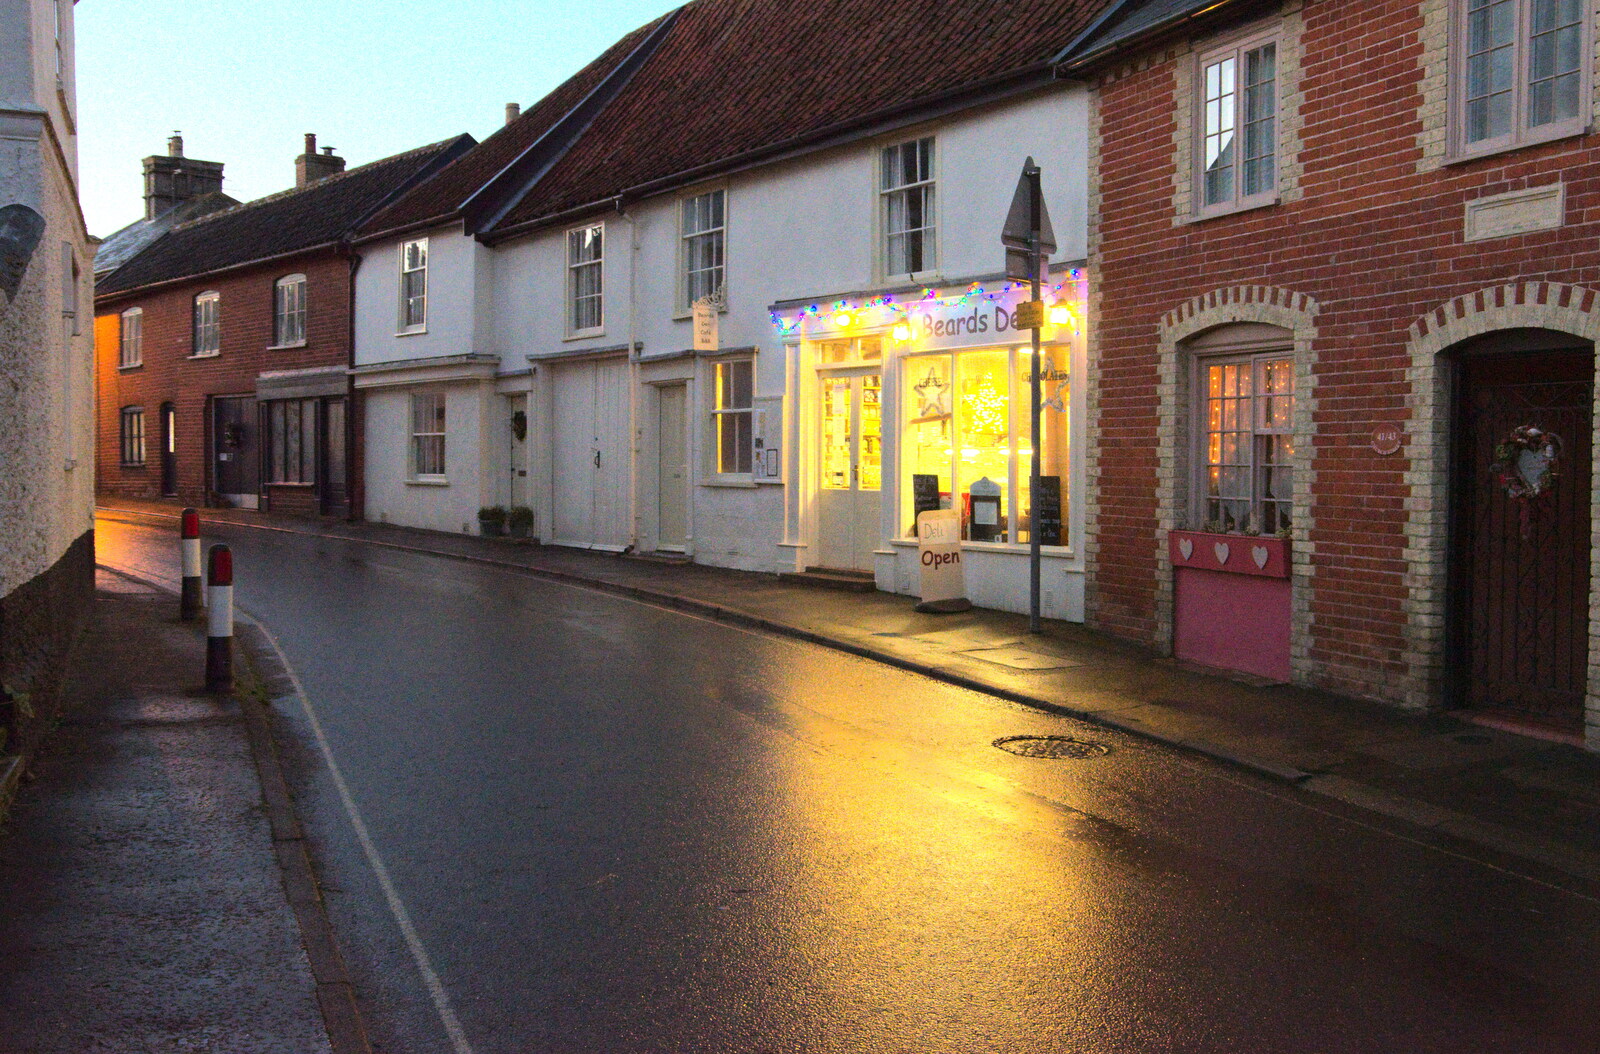 The warm glow of Beard's deli in Eye from Joe Wicks and Diss on Saturday, Norfolk - 19th December 2020